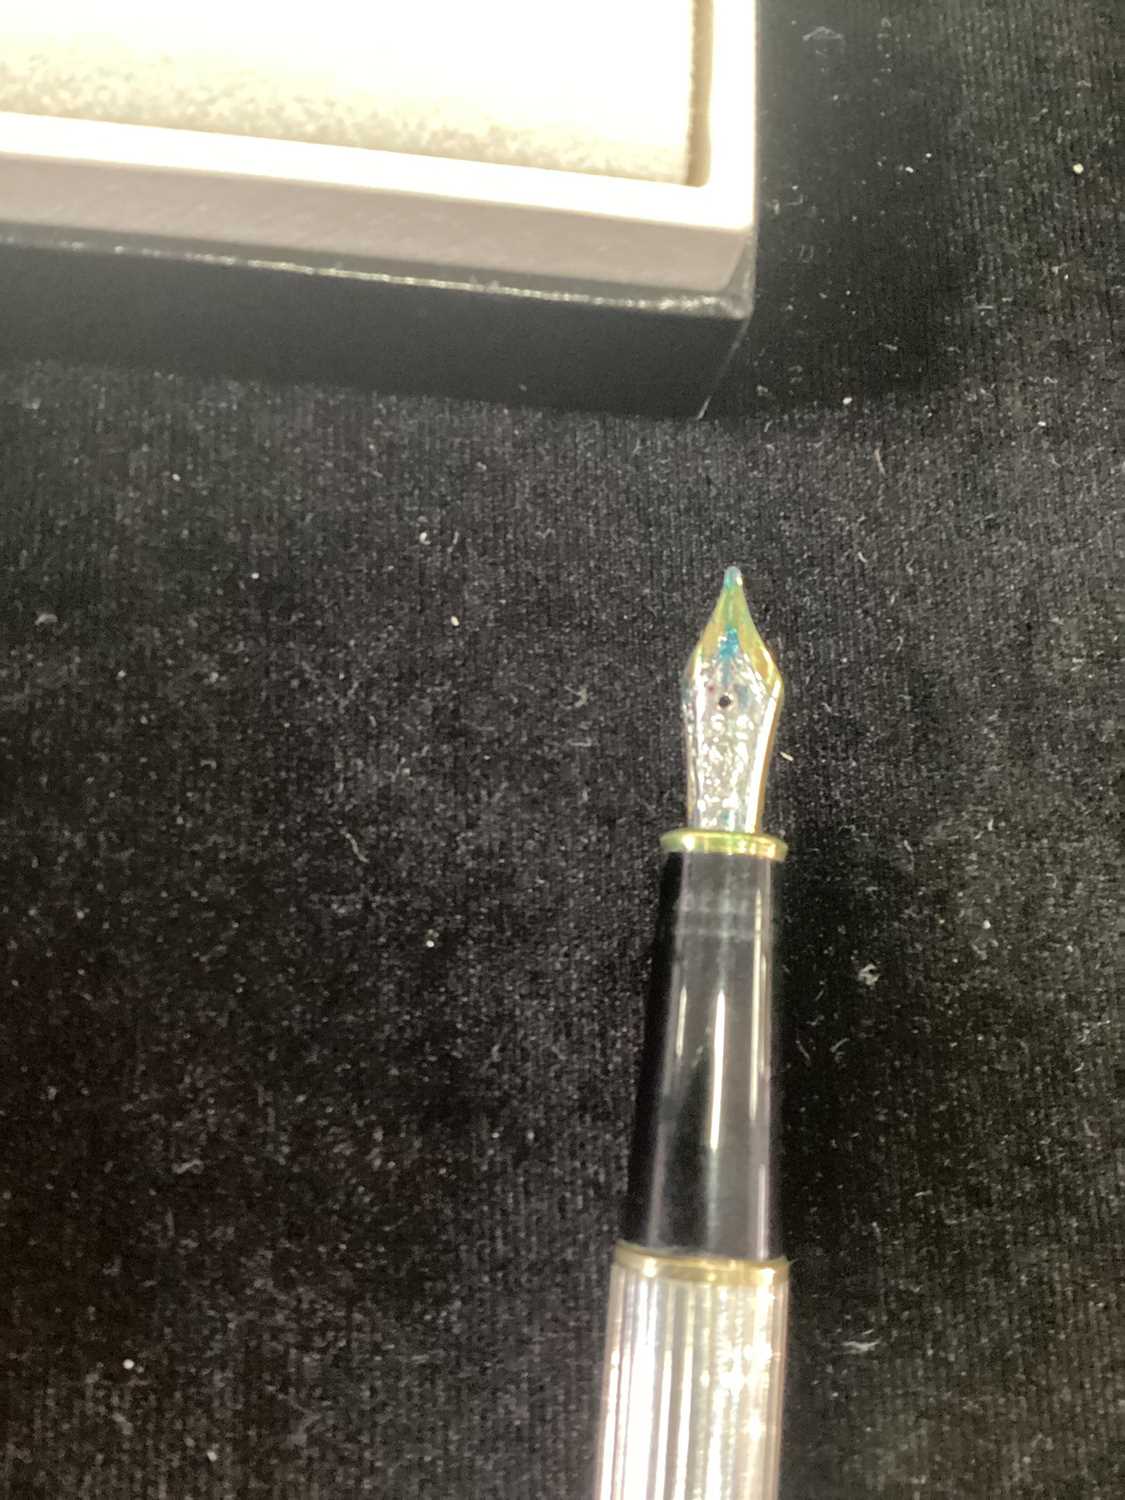 MONT BLANC, SILVER MEISTERSTUCK FOUNTAIN PEN - Image 8 of 8